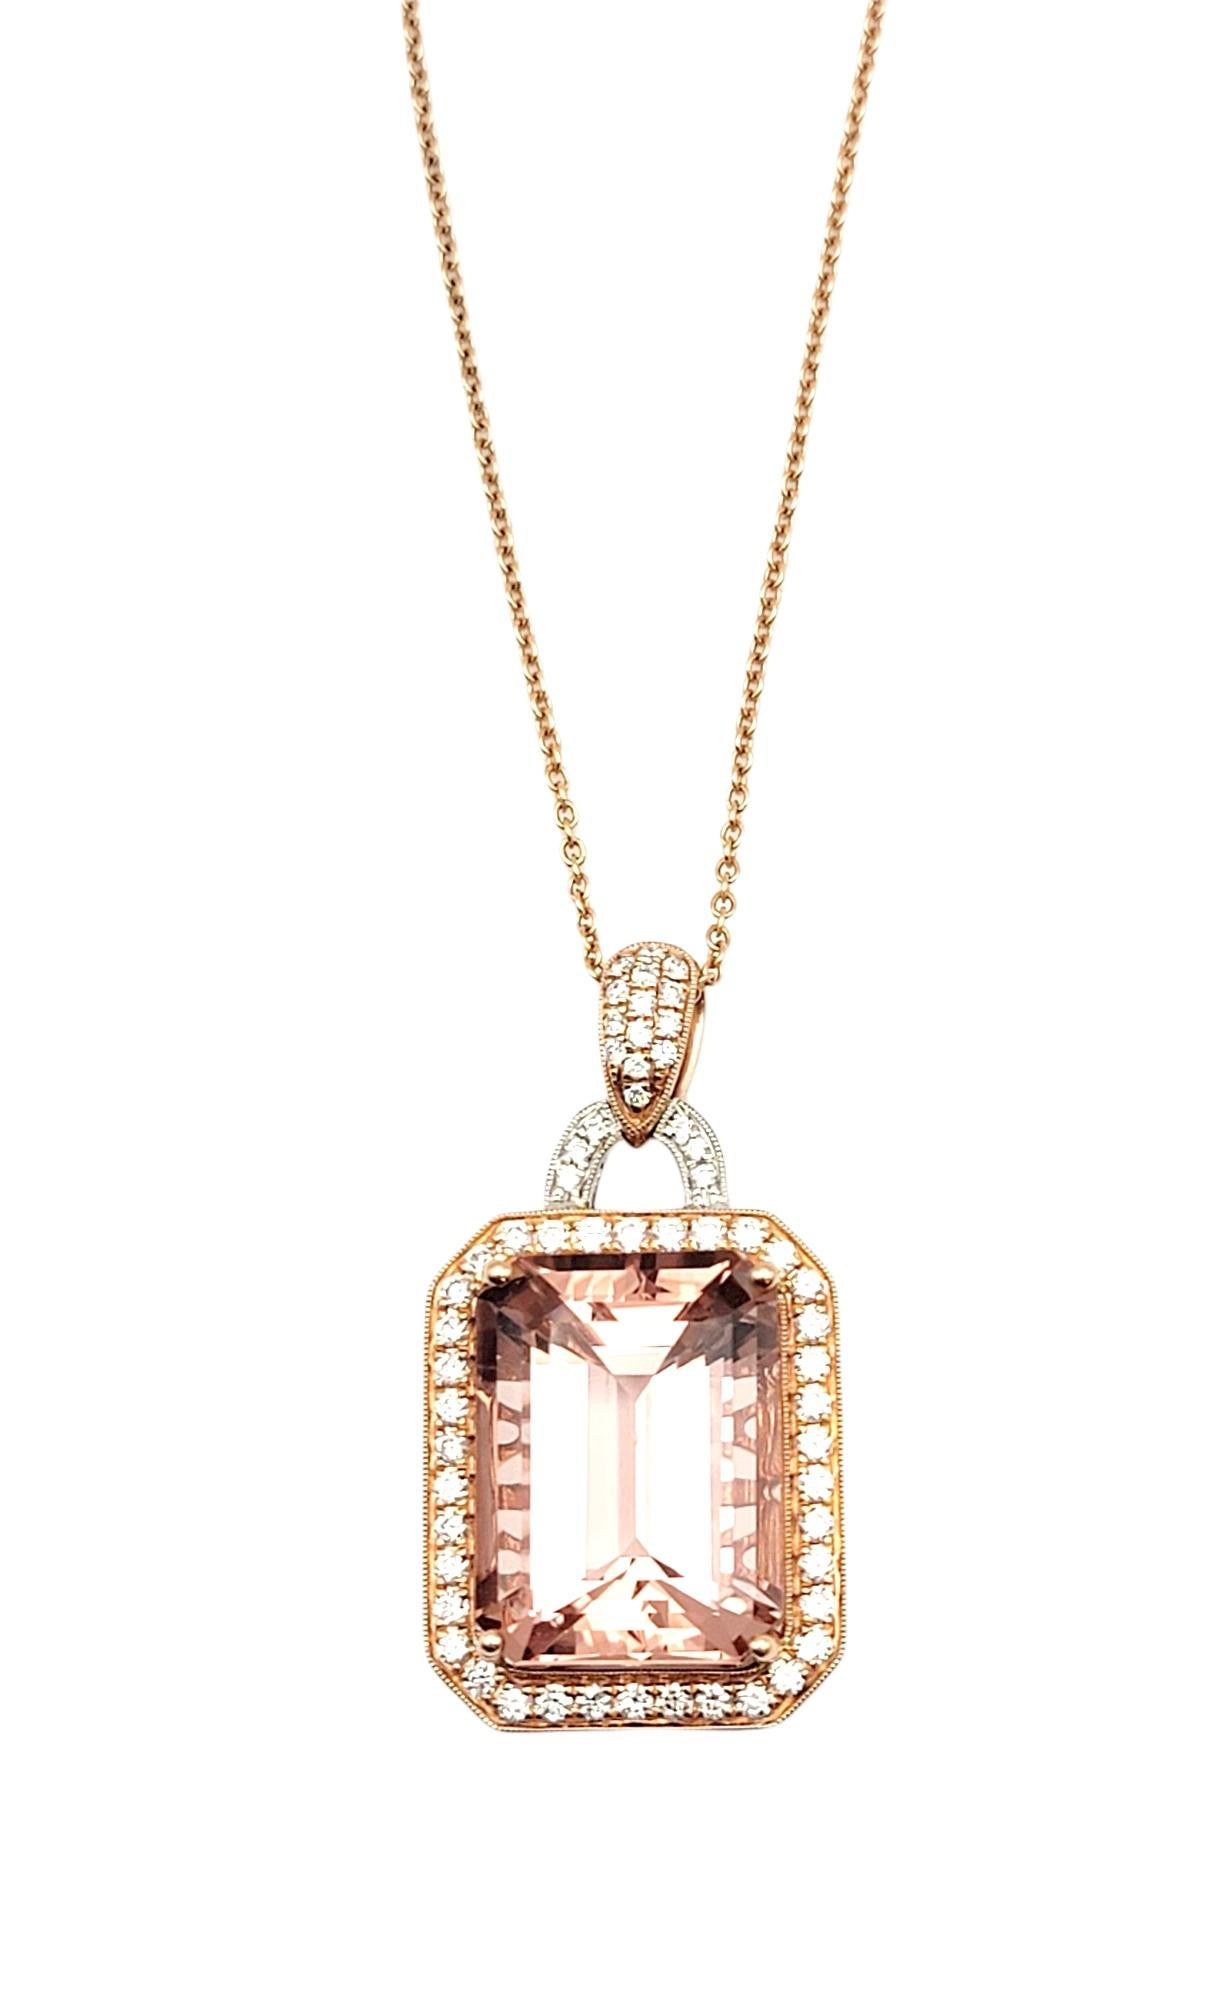 This bold large pendant will add the perfect amount of blush color to your outfit. It is the perfect combination of pink morganite, rose gold, and sparkling diamonds. 

This stunning morganite and diamond pendant necklace features a gorgeous 23.79